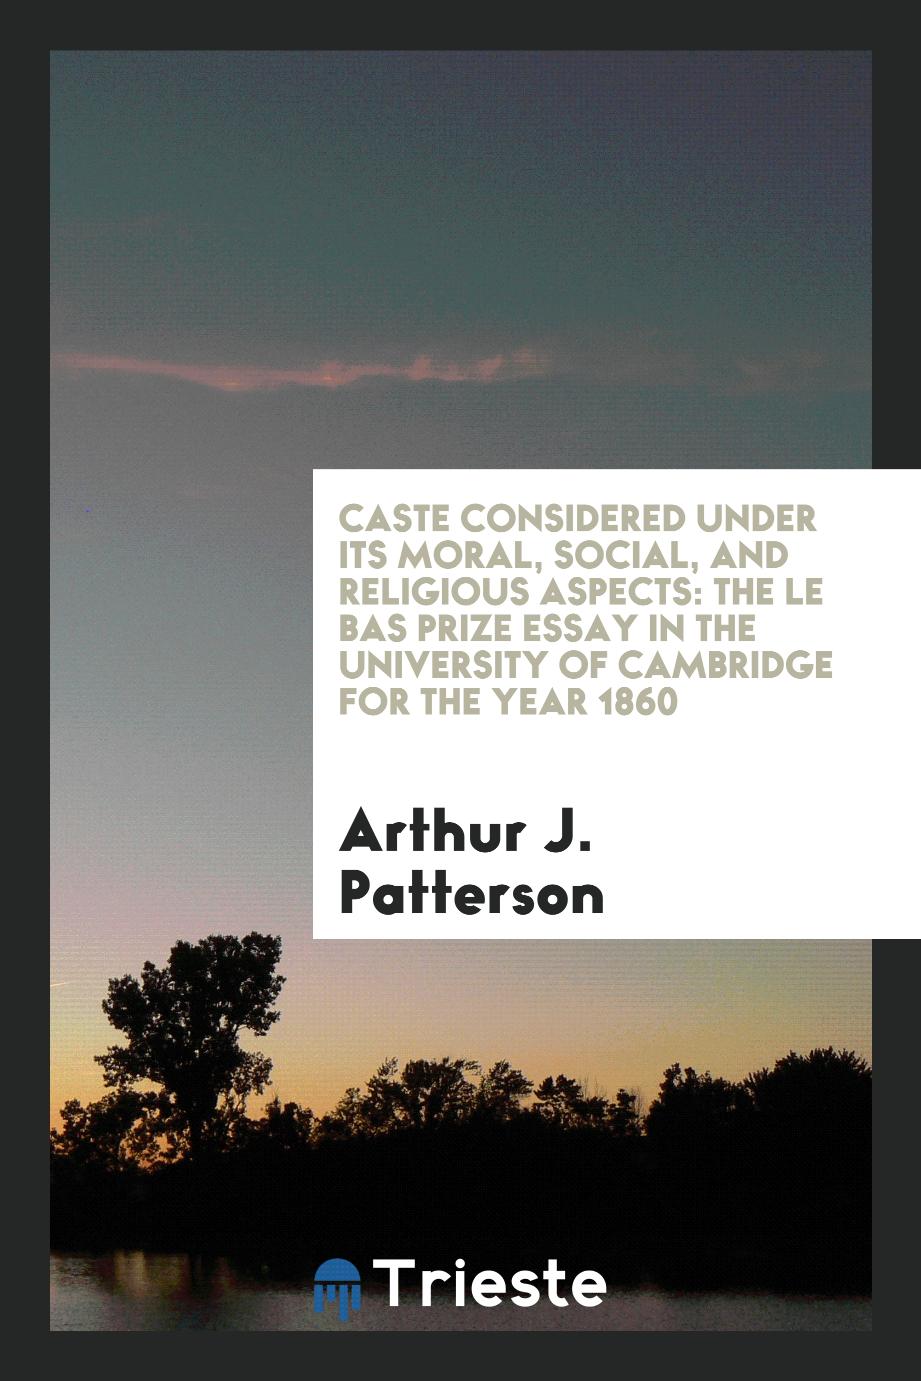 Caste Considered under Its Moral, Social, and Religious Aspects: The Le Bas Prize Essay in the University of Cambridge for the Year 1860